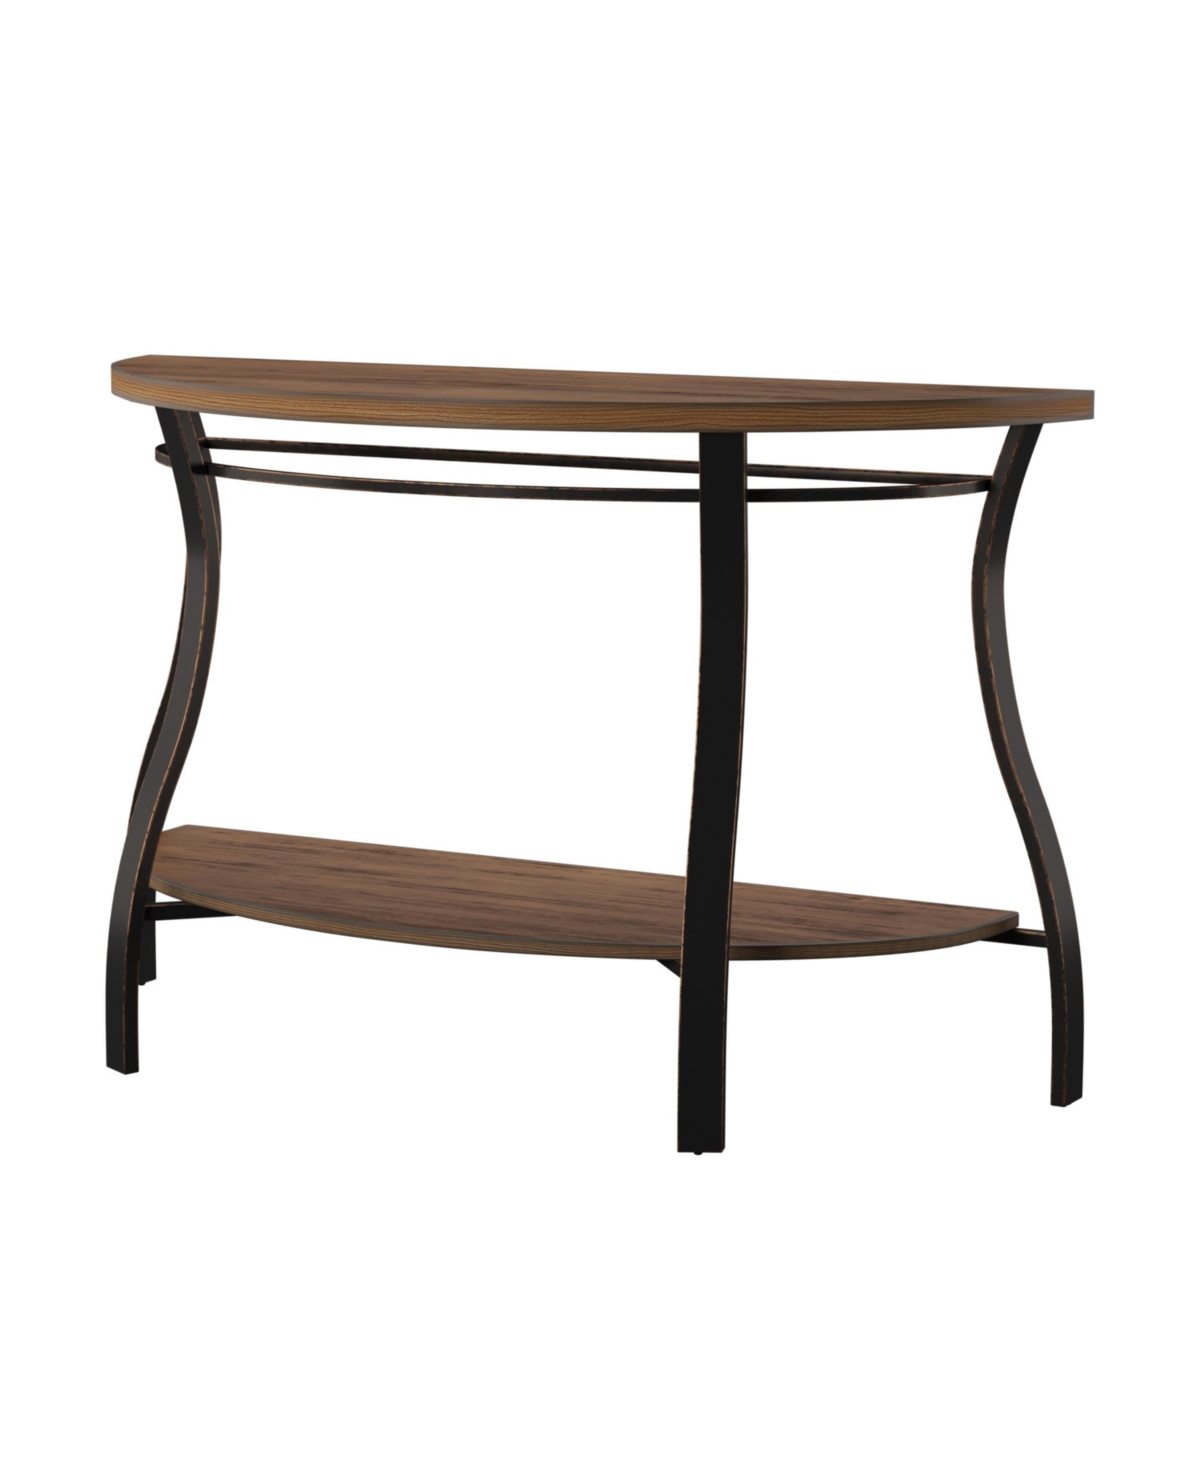 Steve Silver Denise 48" Demilune Wood And Metal Sofa Table In Oak Finish With Hand Applied Burnish